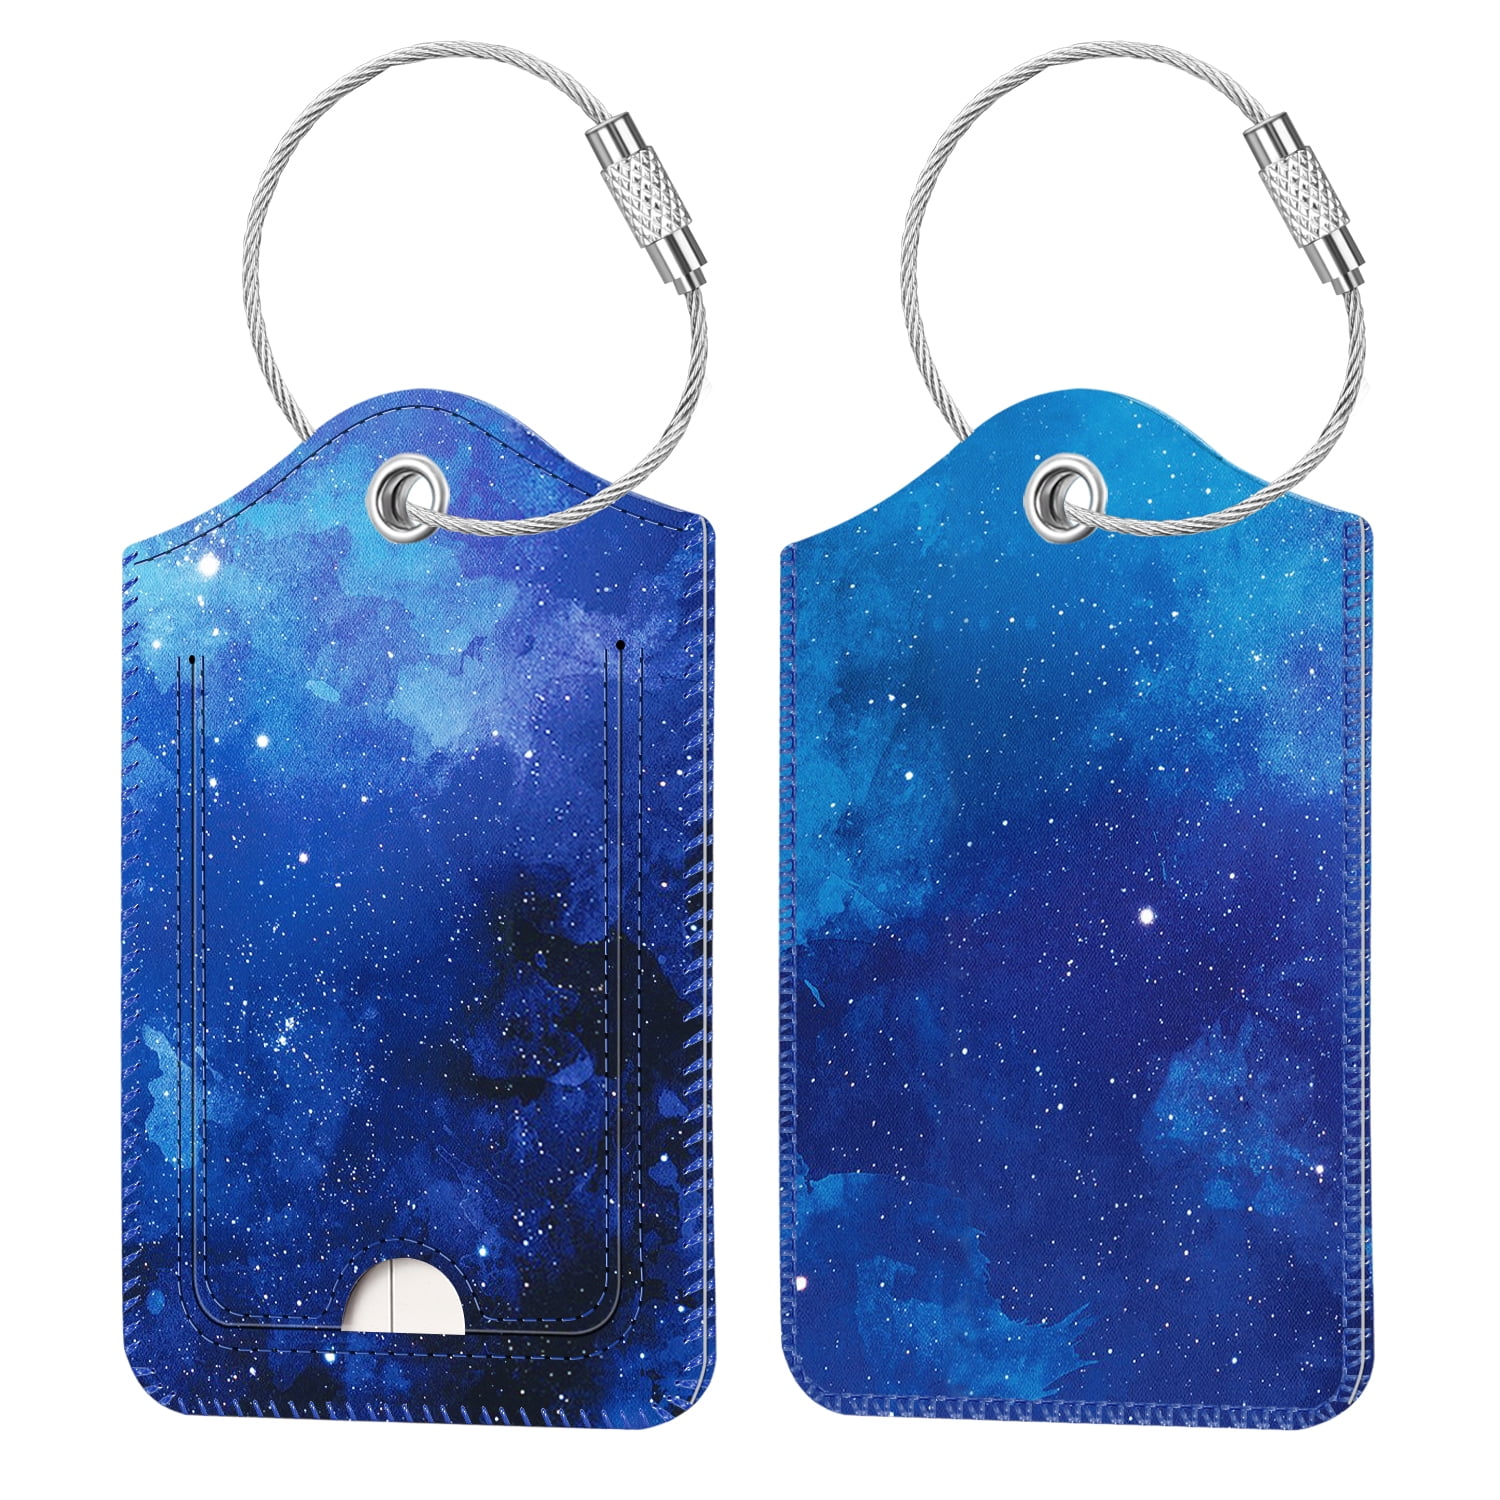 Space Cat Travel Luggage Tags With Full Privacy Cover Leather Case And Stainless Steel Loop